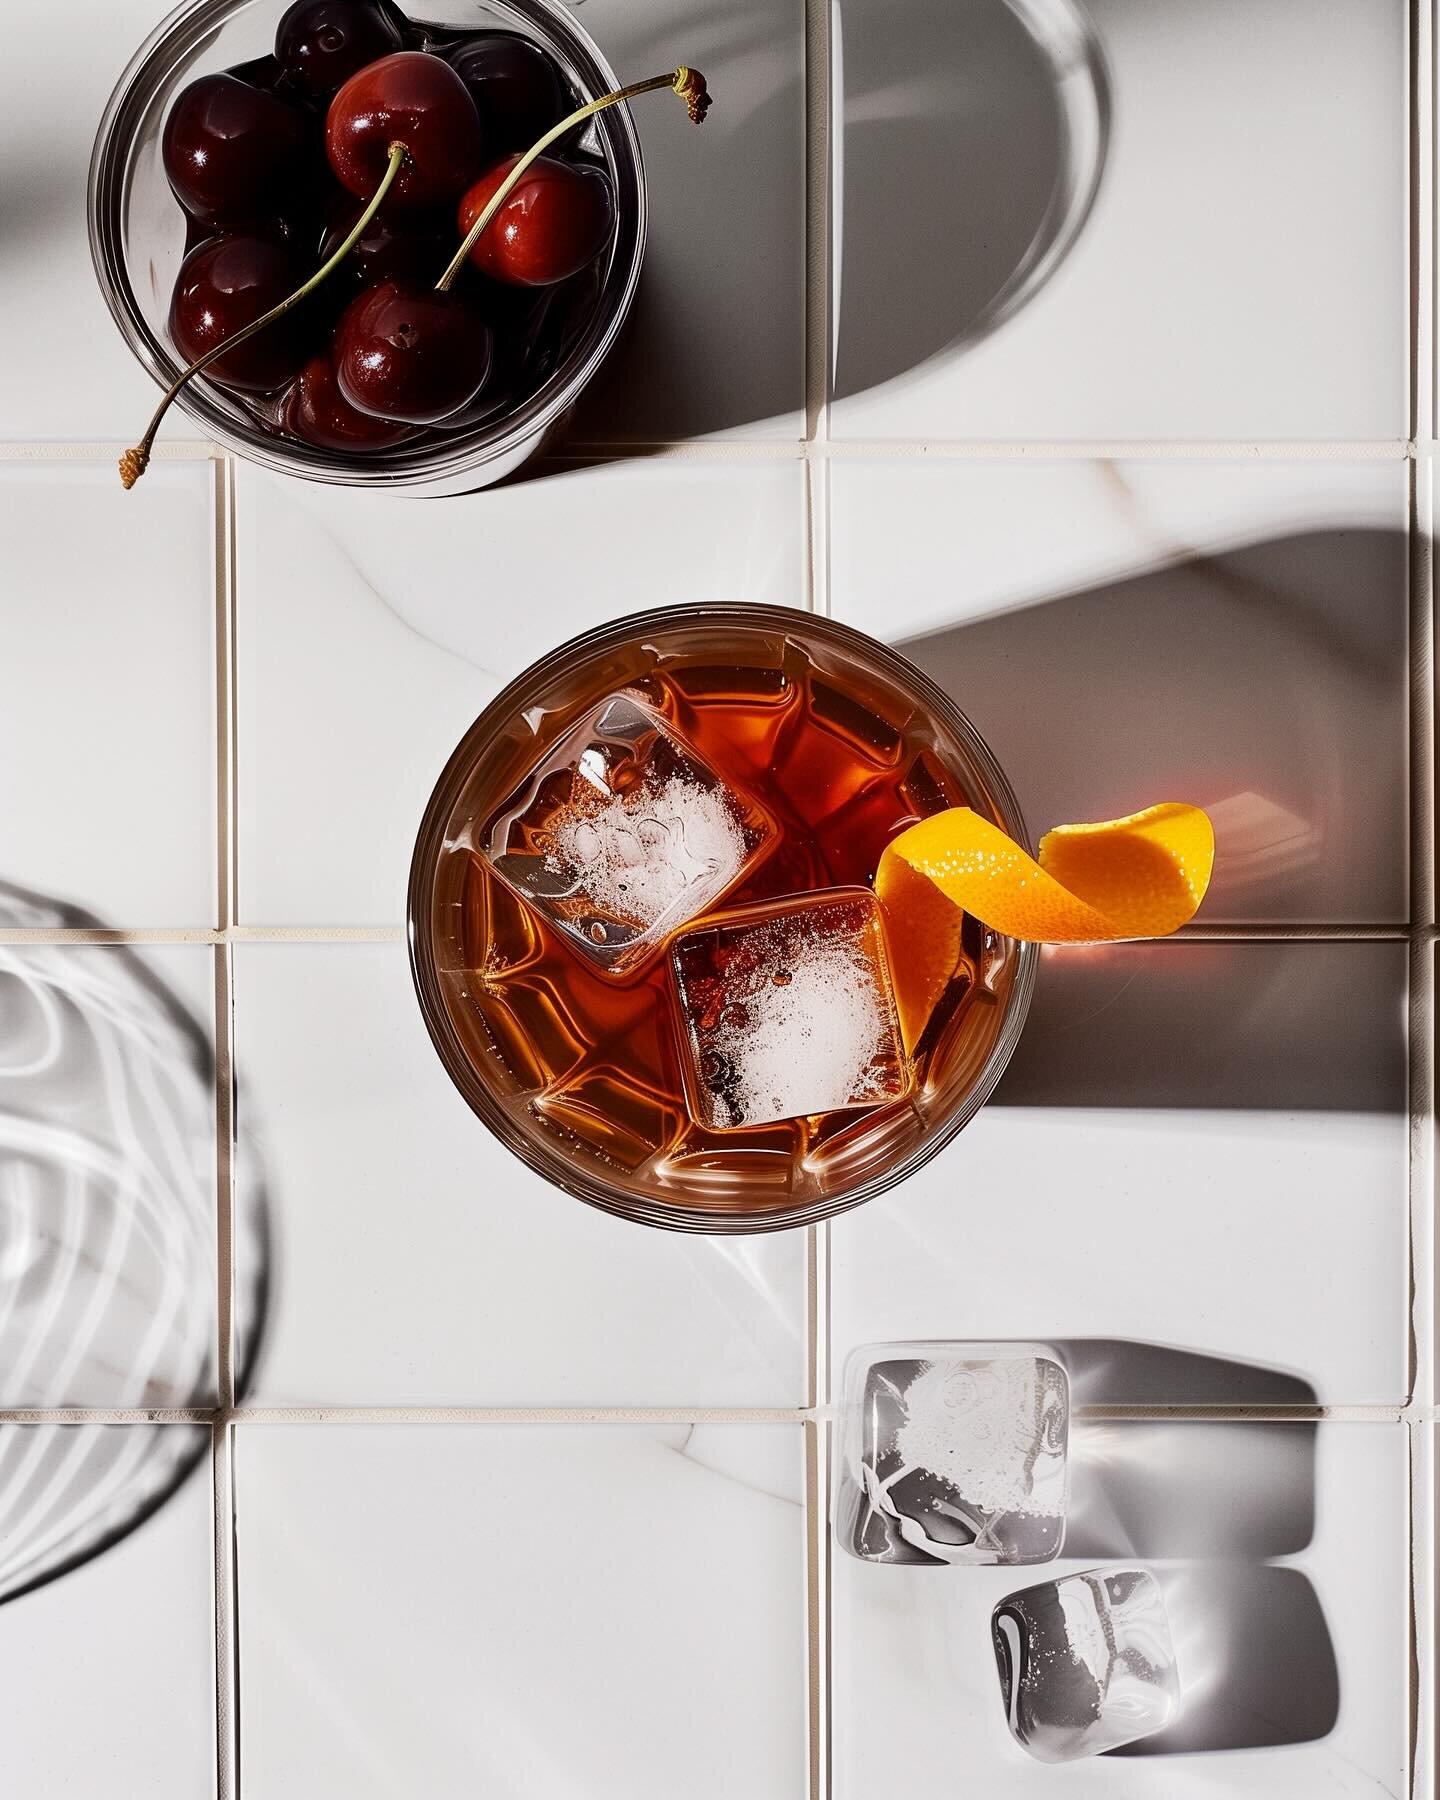 A symphony of rye, sugar, and bitters. Every detail matters when crafting the perfect Old Fashioned. #oldfashionedcocktail #brandiedcherries #foodphotography #cheers